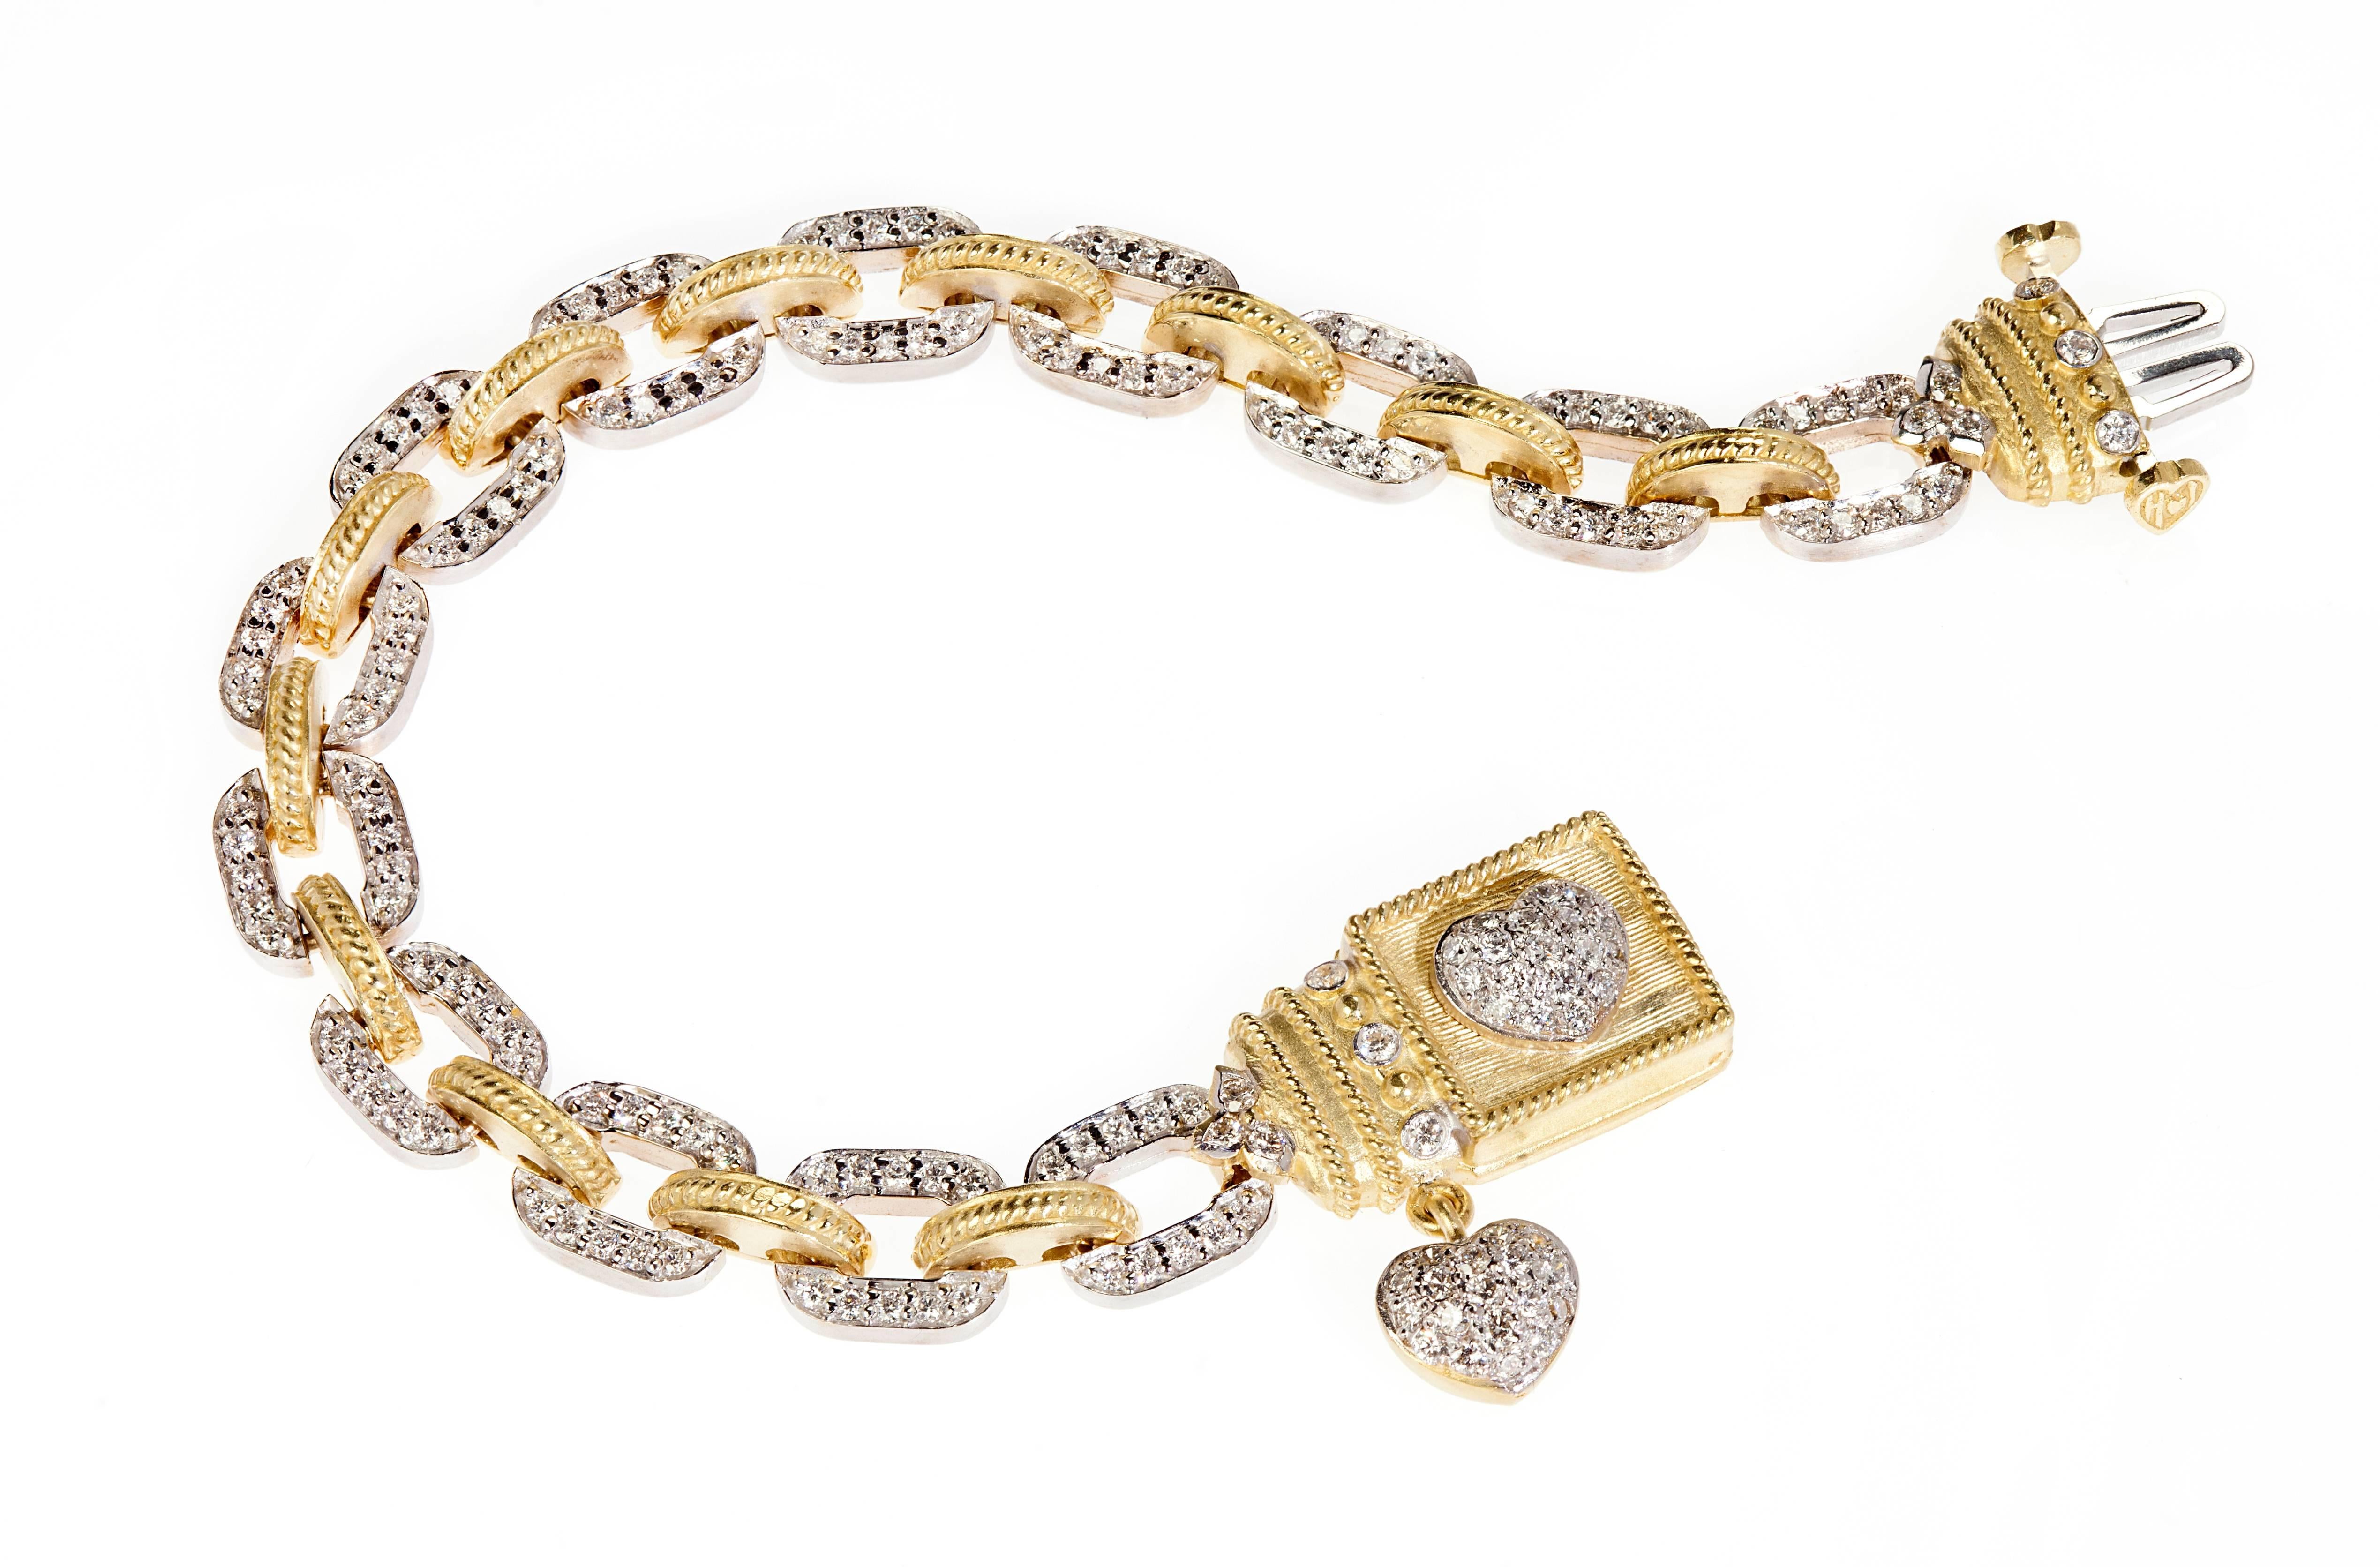 Stambolian 18 Karat Yellow White Two Tone Gold Diamond Link Bracelet with Hearts

Bracelet links are alternating white and yellow gold. The white gold links have diamonds set on one side.

2.30ct. apprx. G Color, VS Clarity Diamonds

7 inches